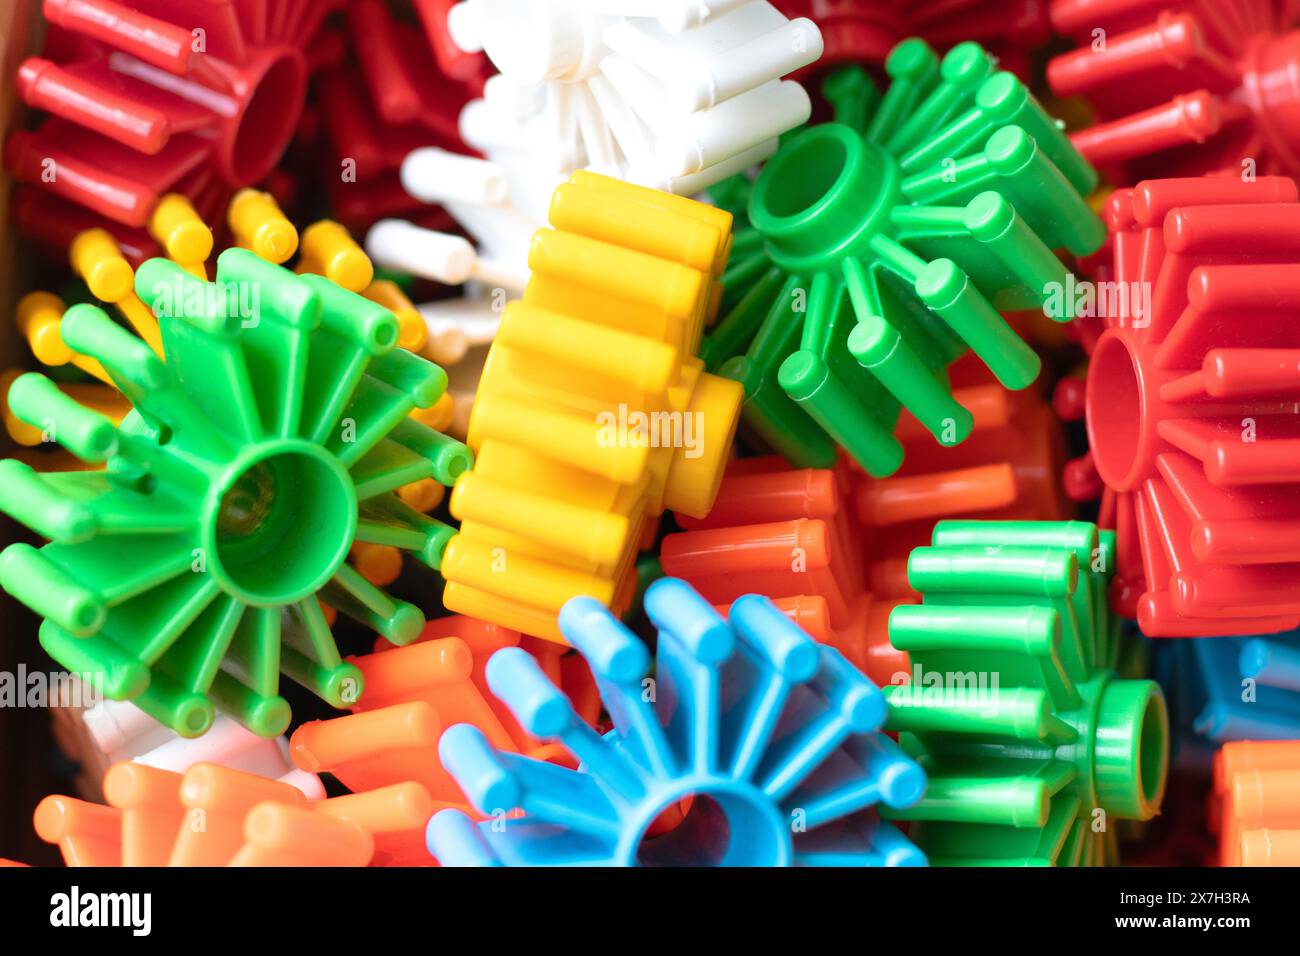 Colorful plastic toy gear. Top view. Building construction toys idea concept for kids. Above. Horizontal photo. No people, nobody. Pattern. Wallpaper. Stock Photo